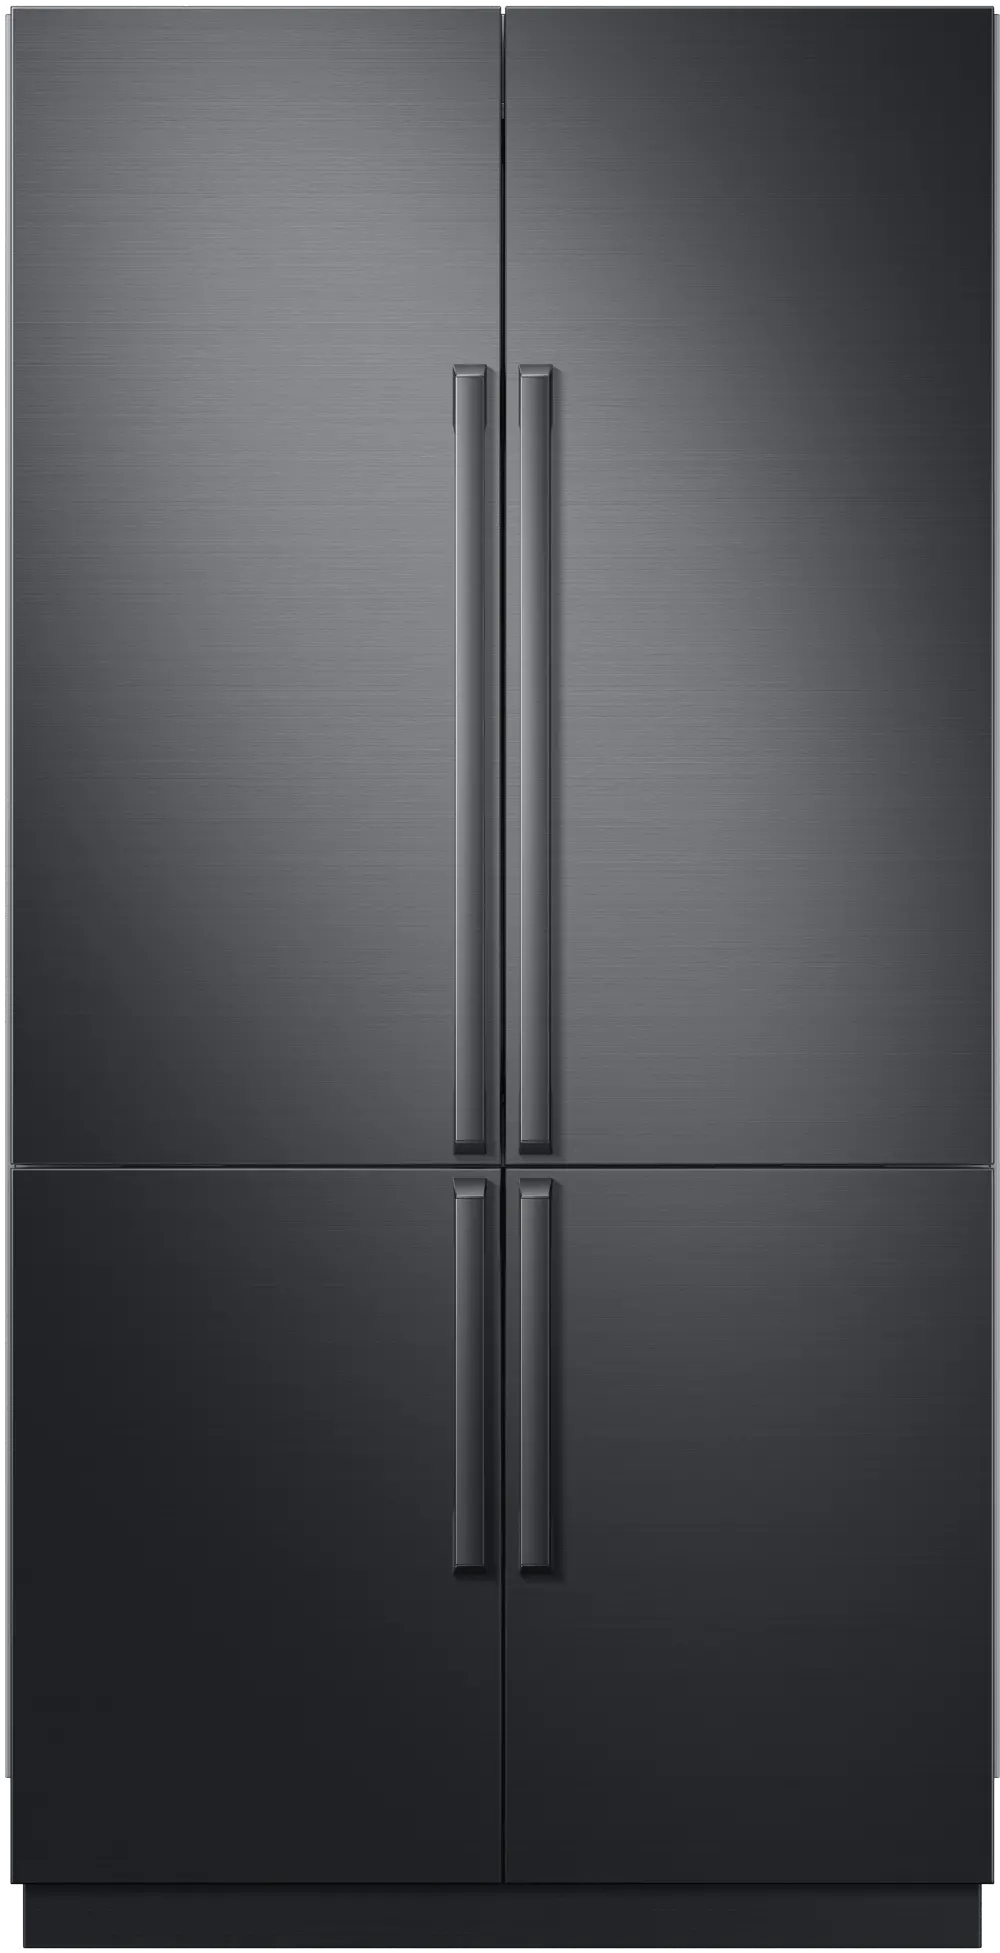 BRF425200AP Samsung Chef 24 cu. ft. French Door Refrigerator - 42 Inch Built In Panel Ready-1